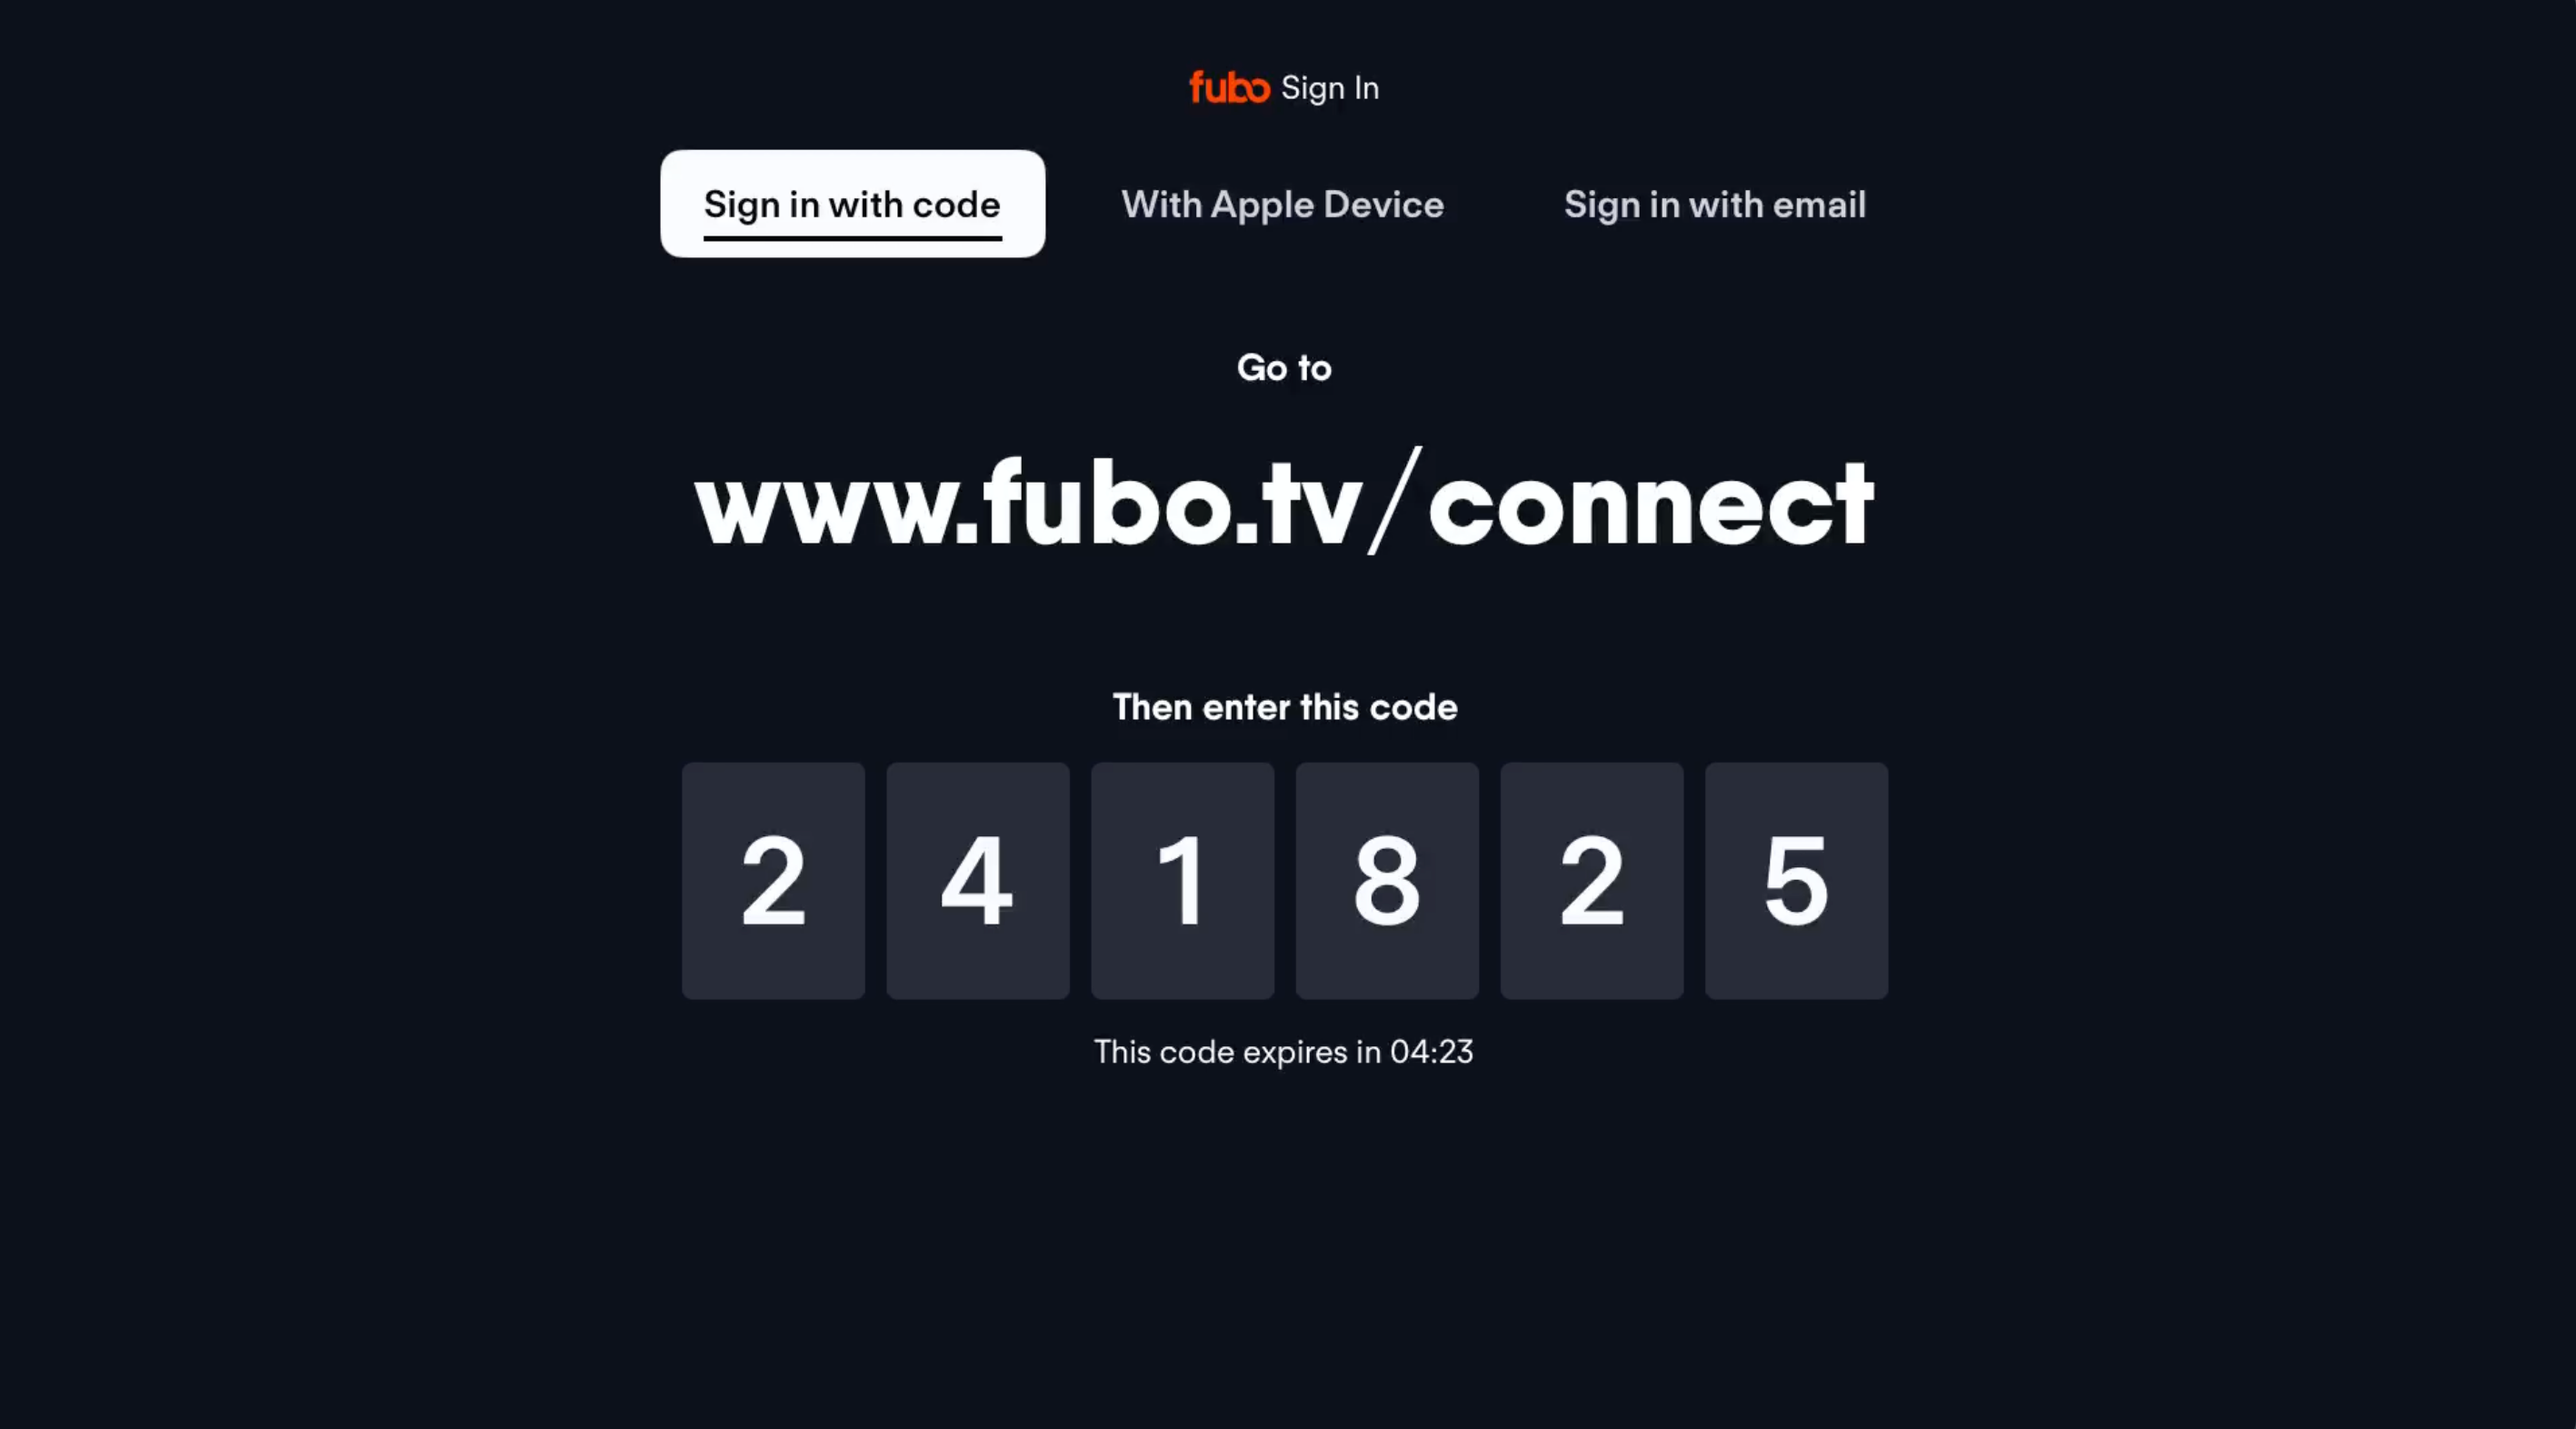 Sample activation code for the FuboTV app on Apple TV, visit fubo.tv/connect and enter to the code to sign in automatically